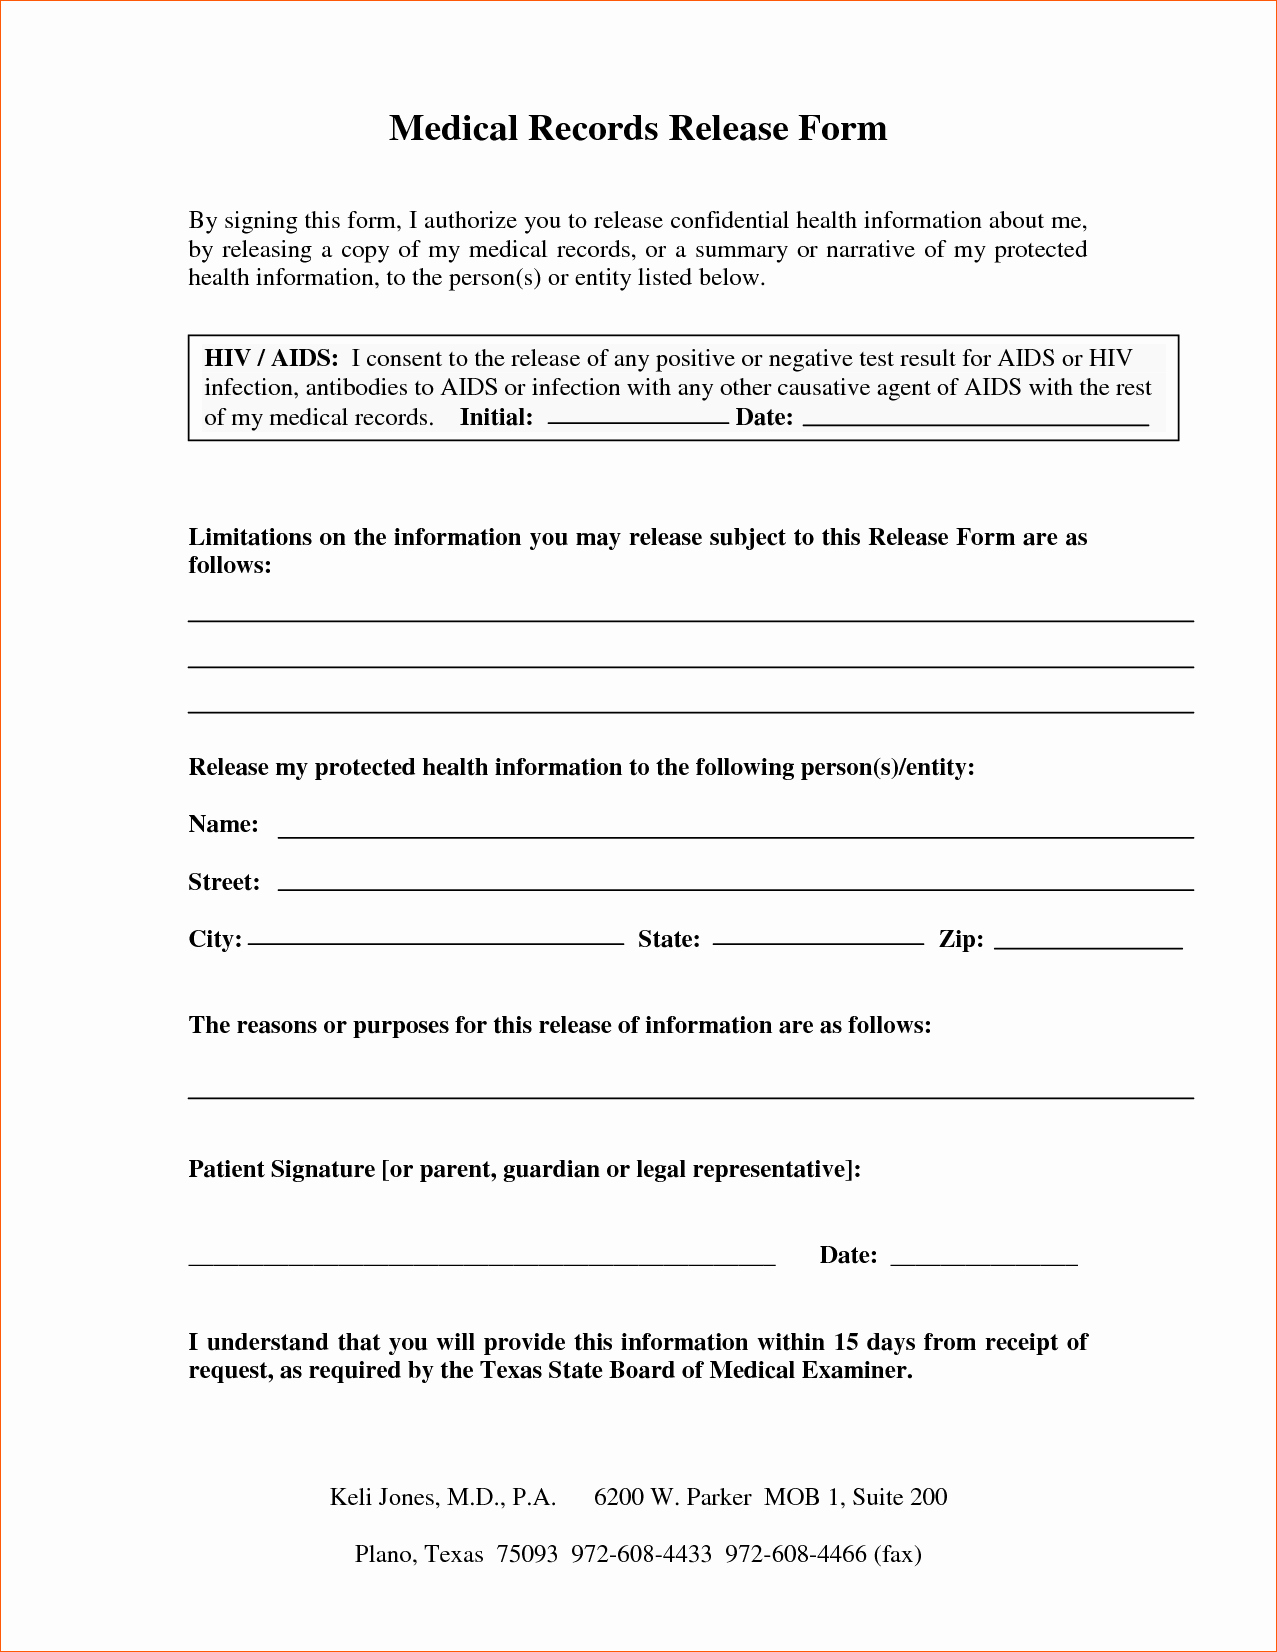 7 Blank Medical Records Release form